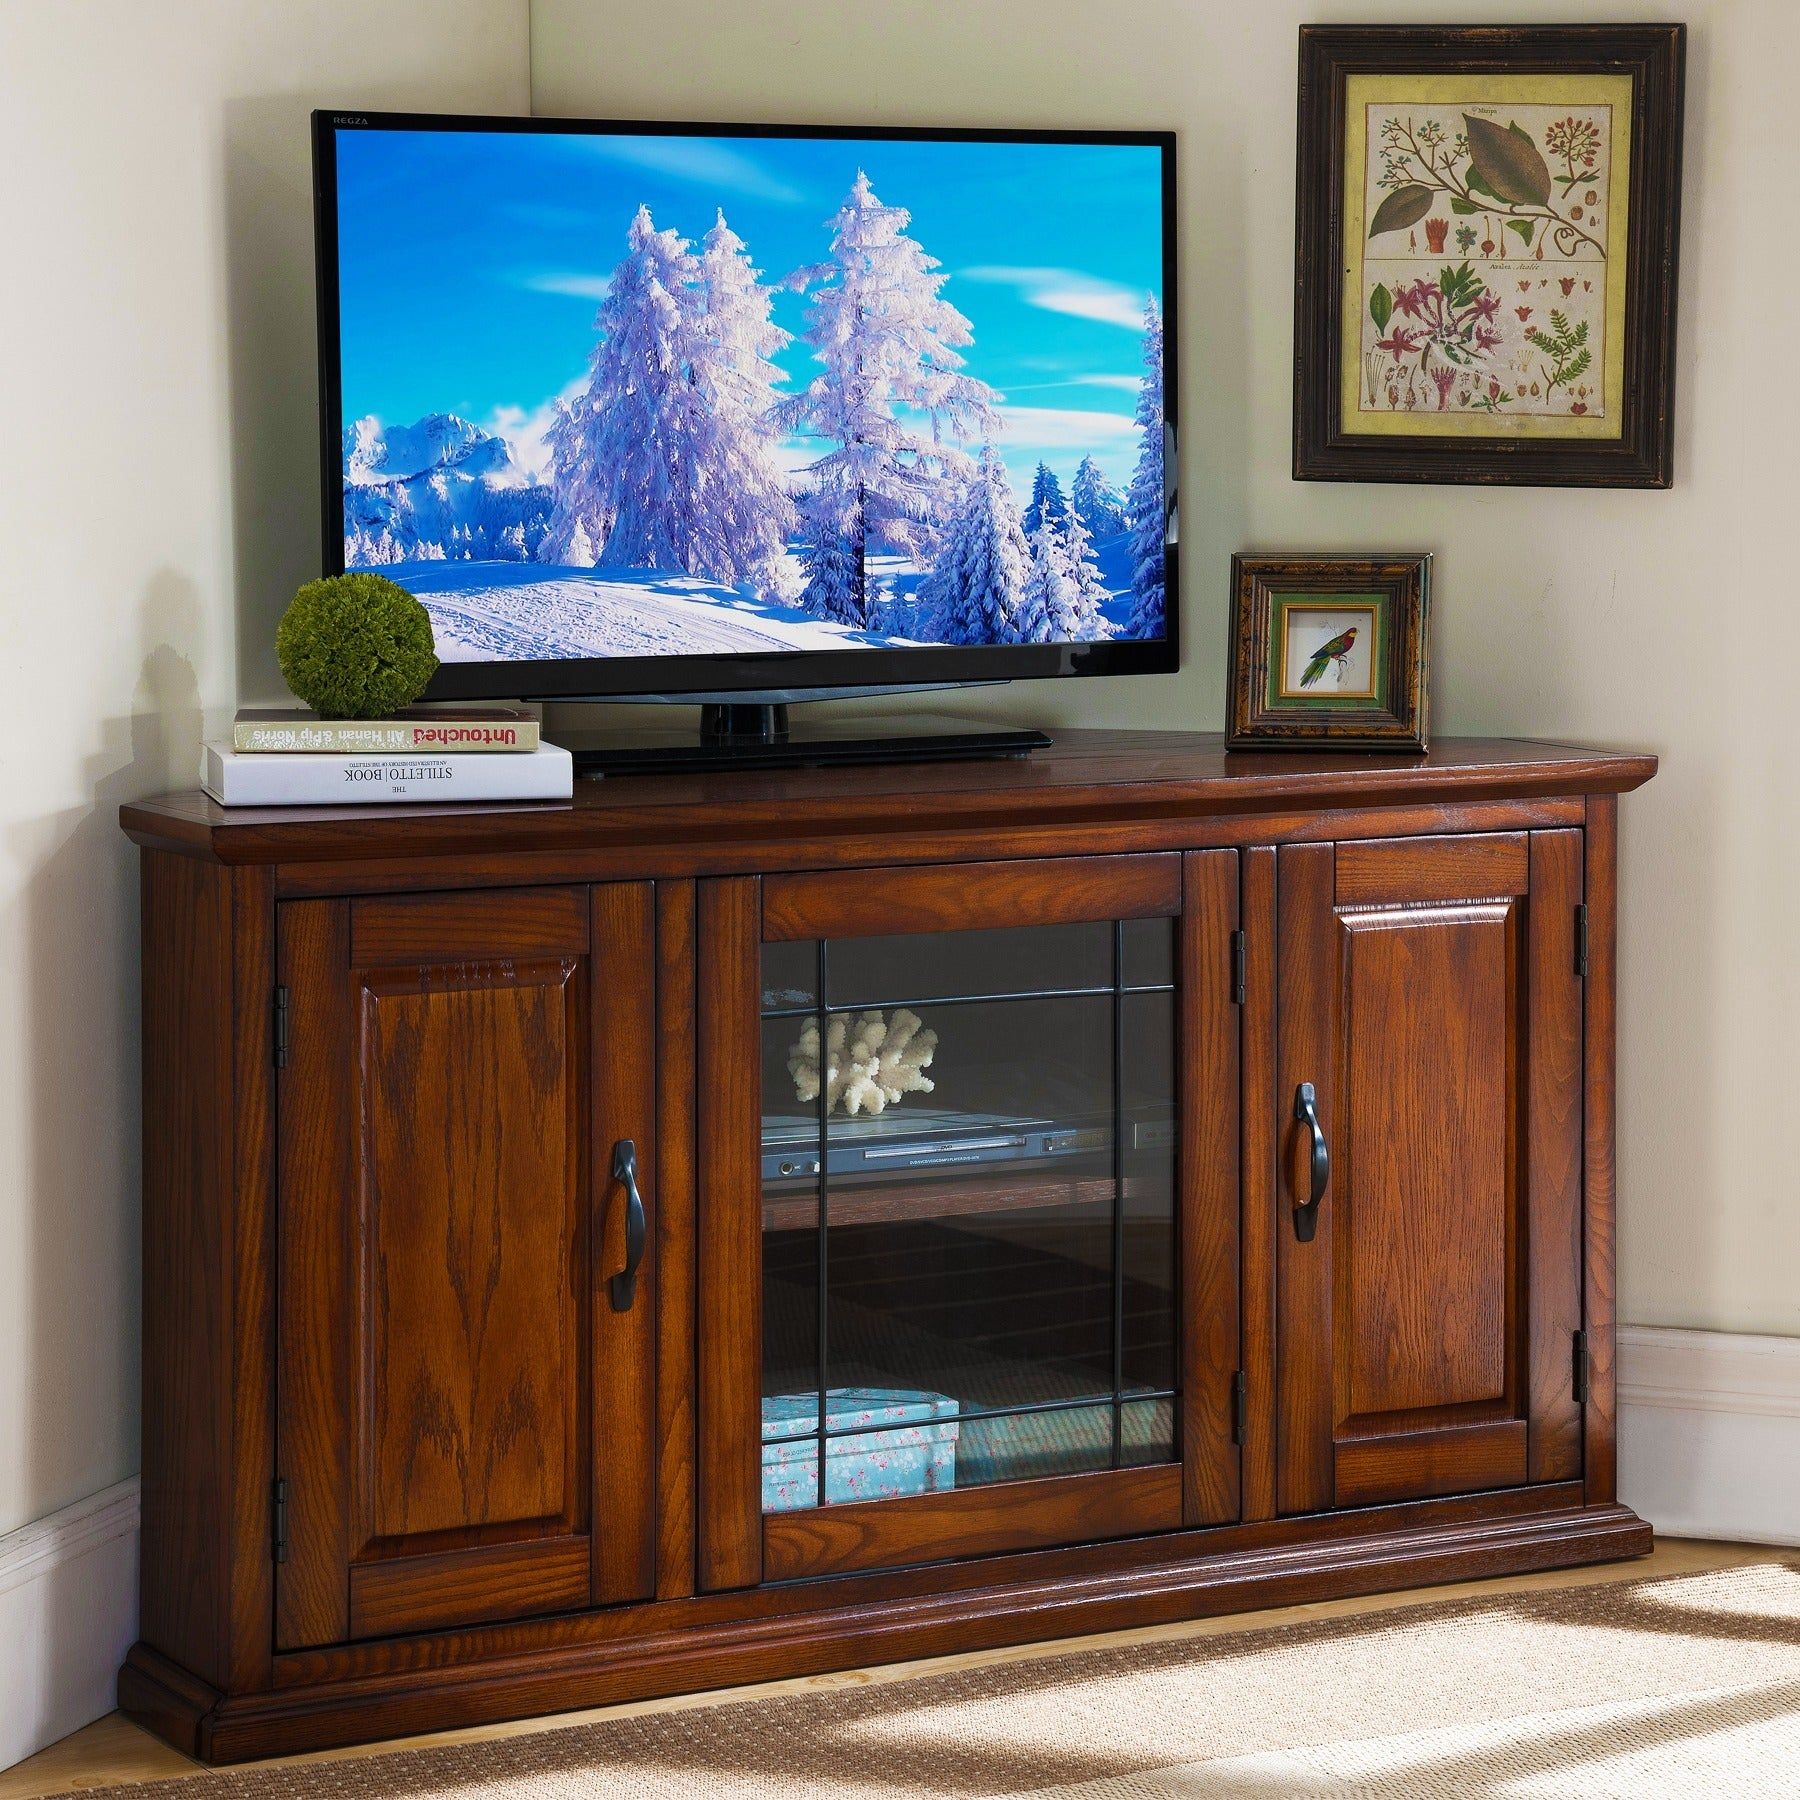 Burnished Oak 50 Inch Tv Stand And Media Corner Console Within Wooden Tv Stands For 50 Inch Tv (View 8 of 15)